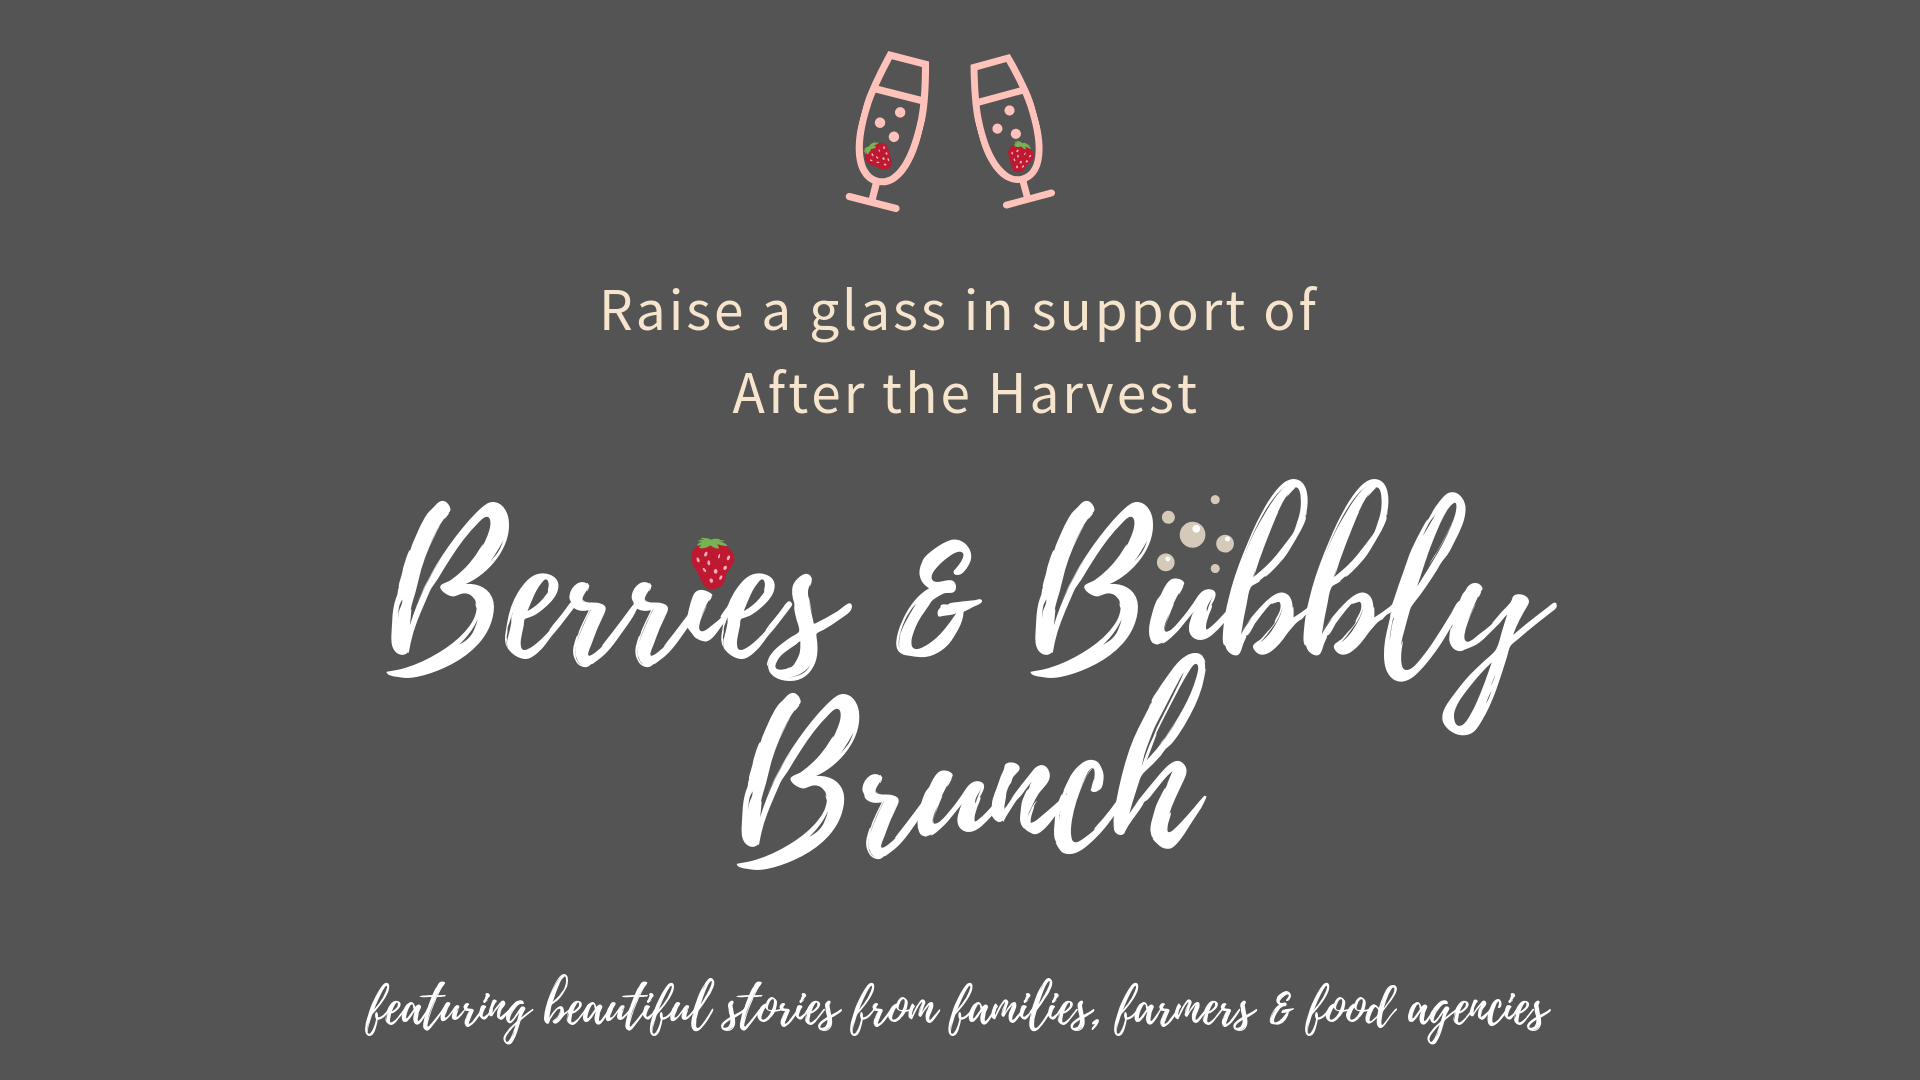 Berries & Bubbly Brunch » After the Harvest